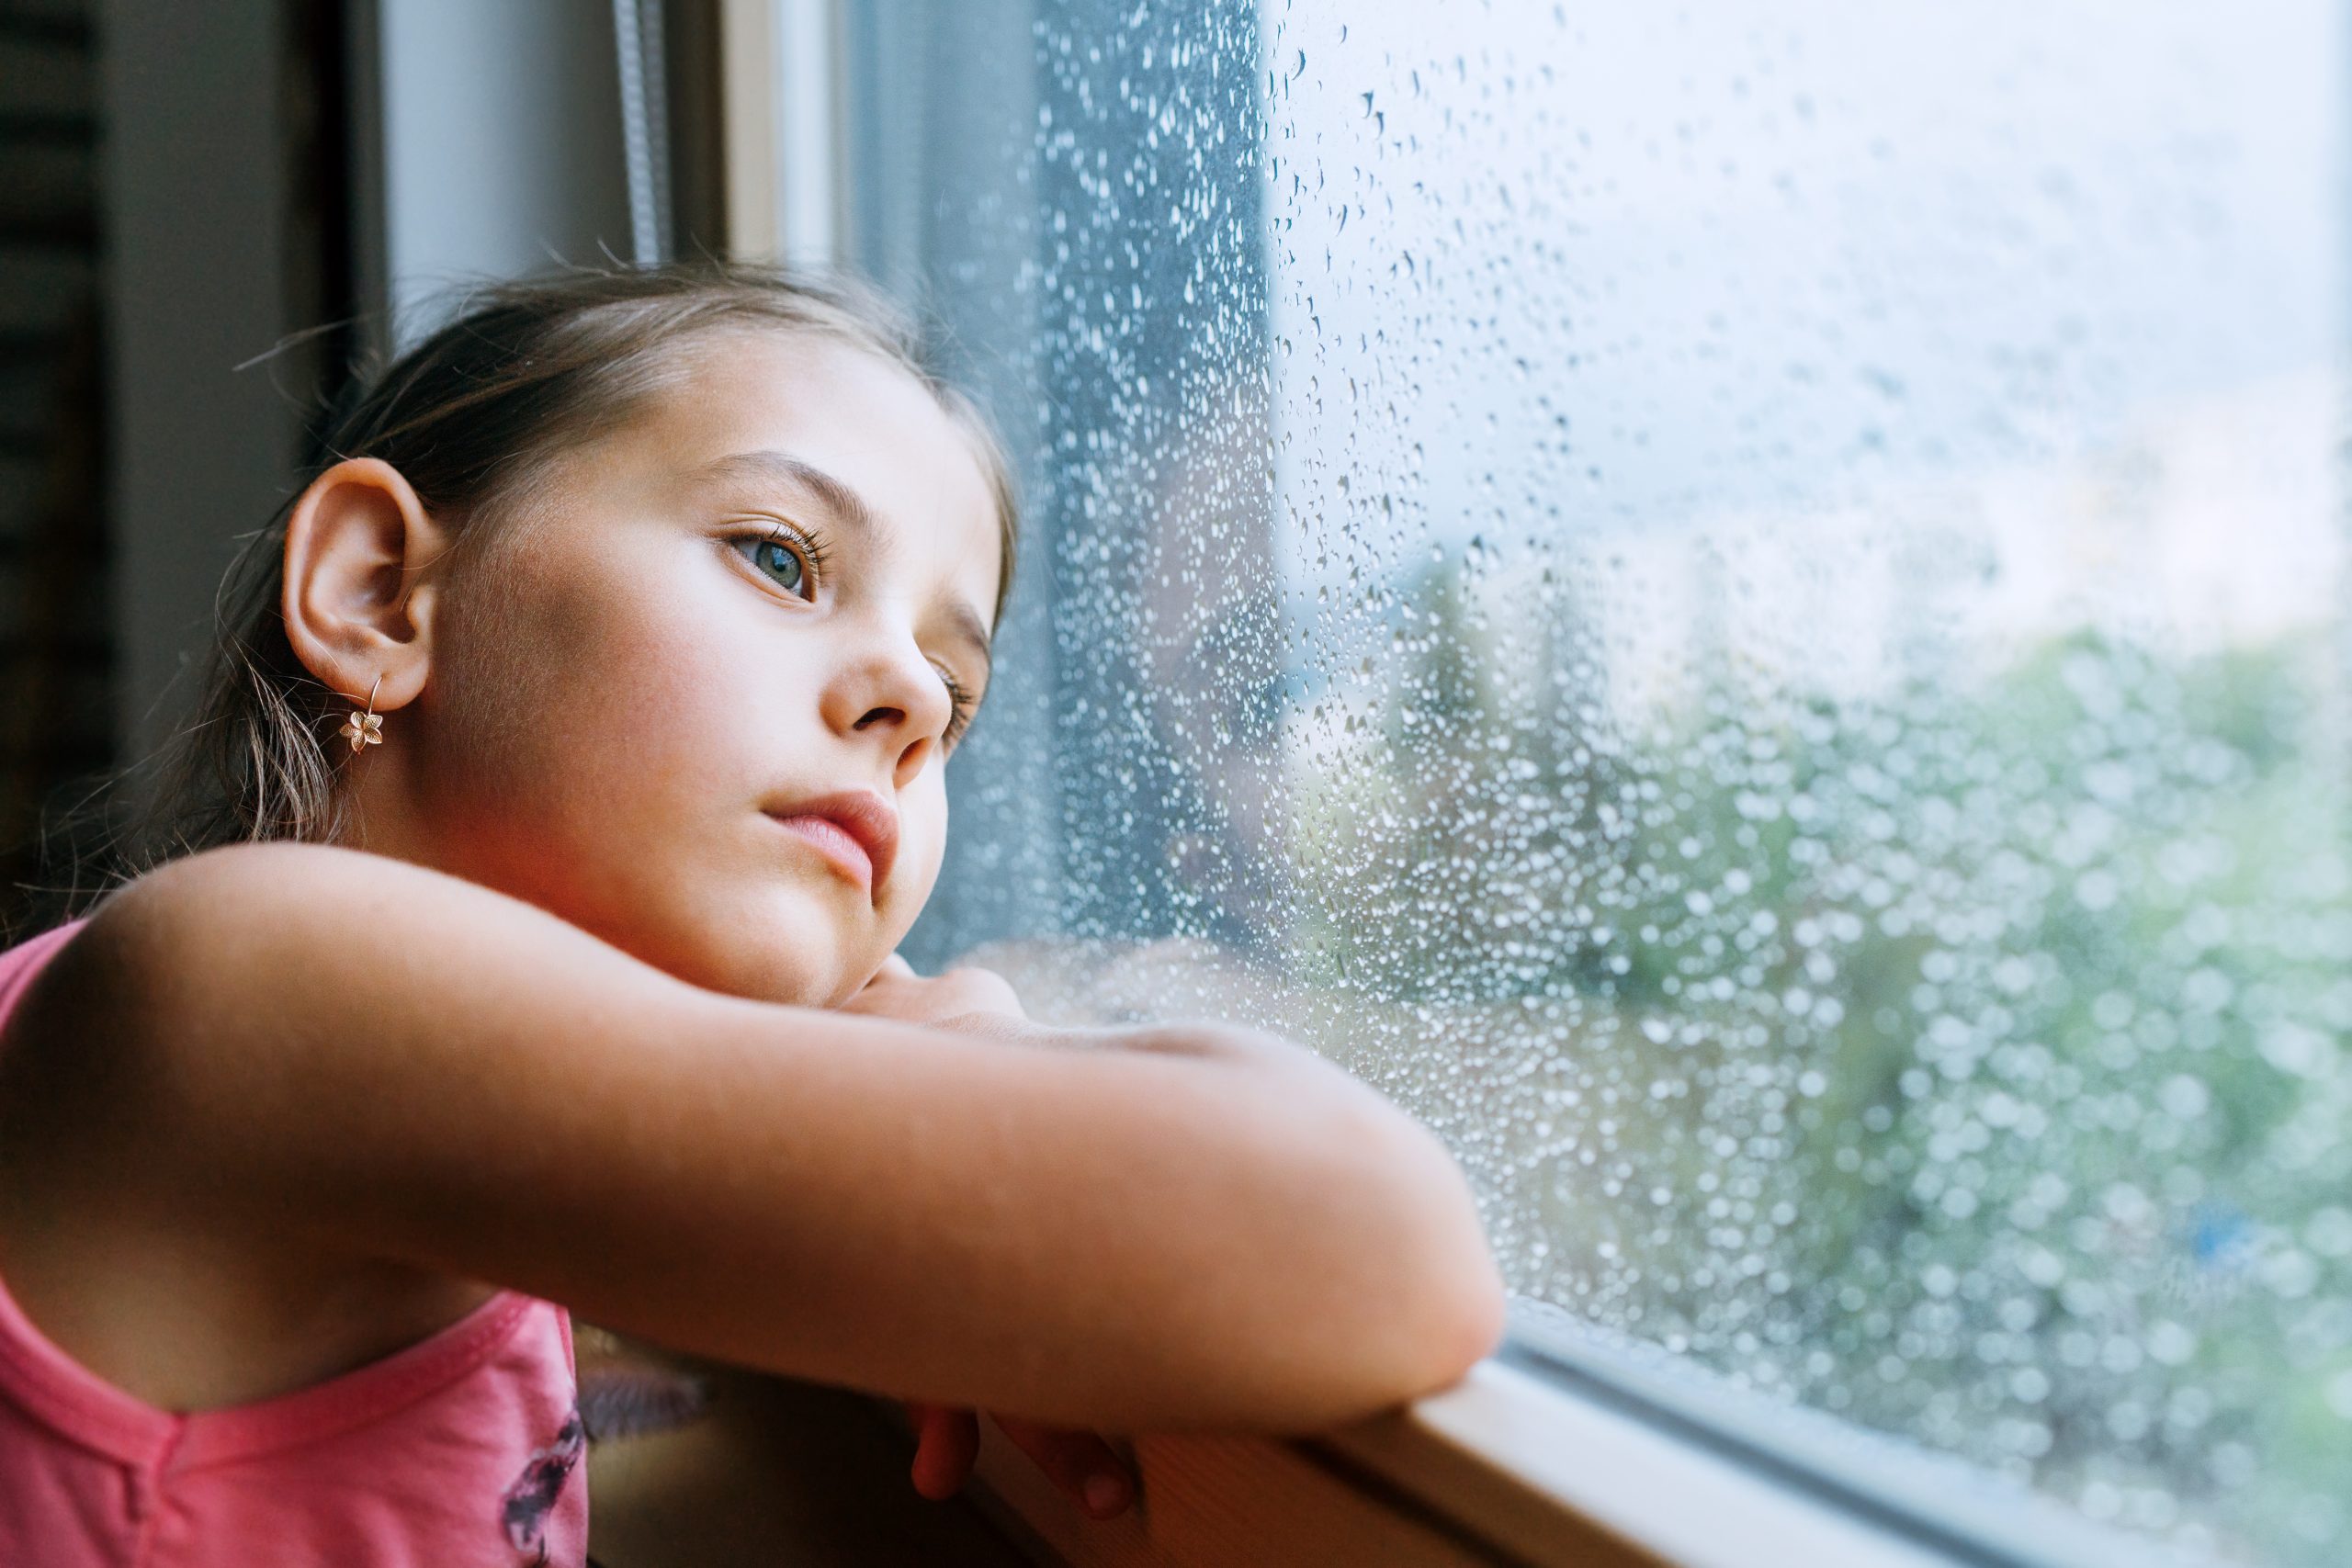 Little sad girl pensive looking through the window glass with a lot of raindrops.